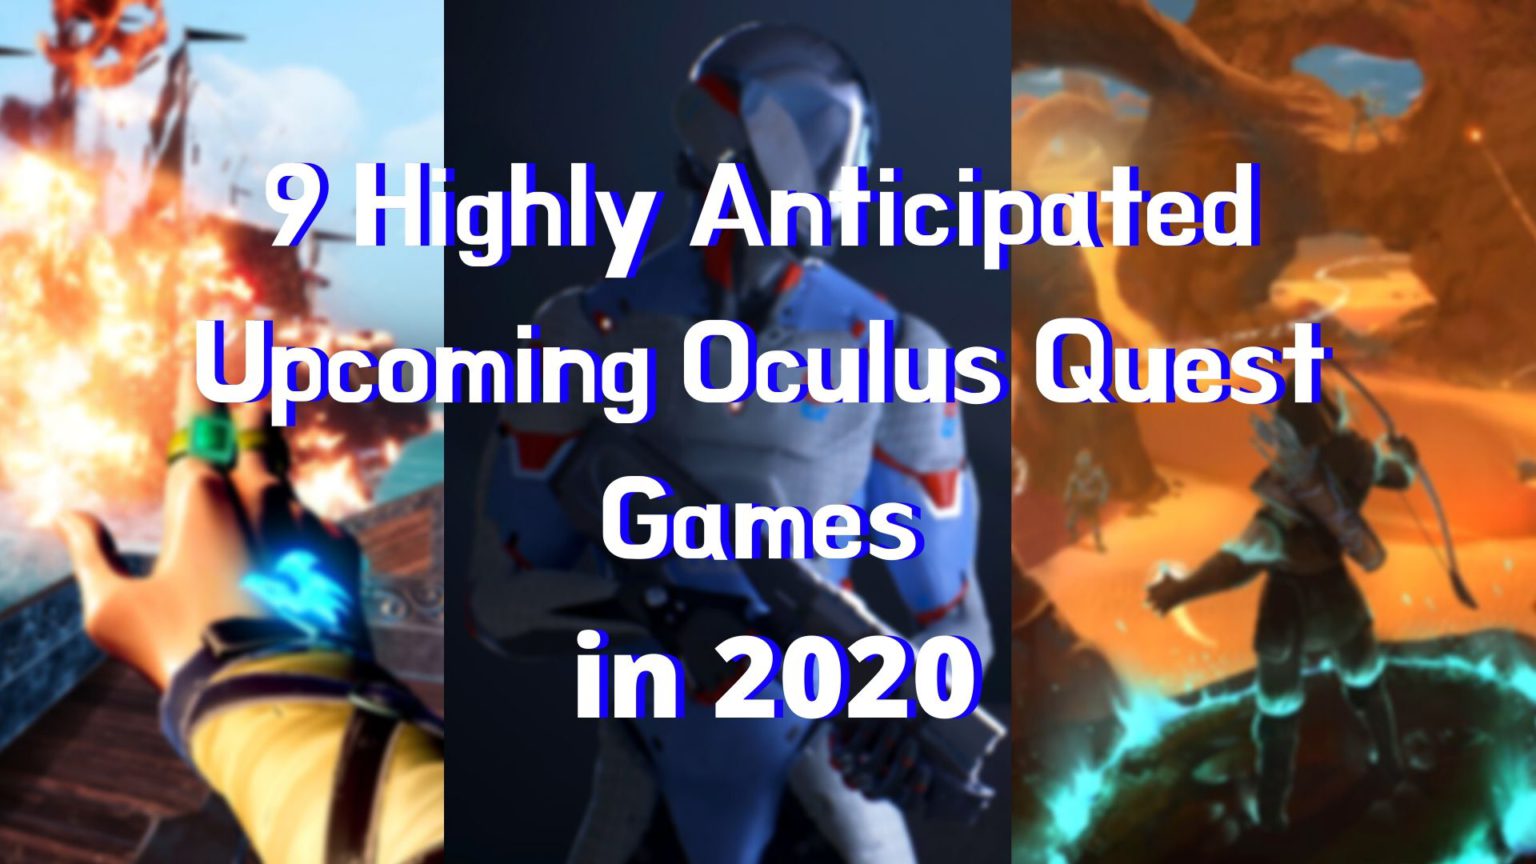 9 Highly Anticipated Oculus Quest Games in 2020